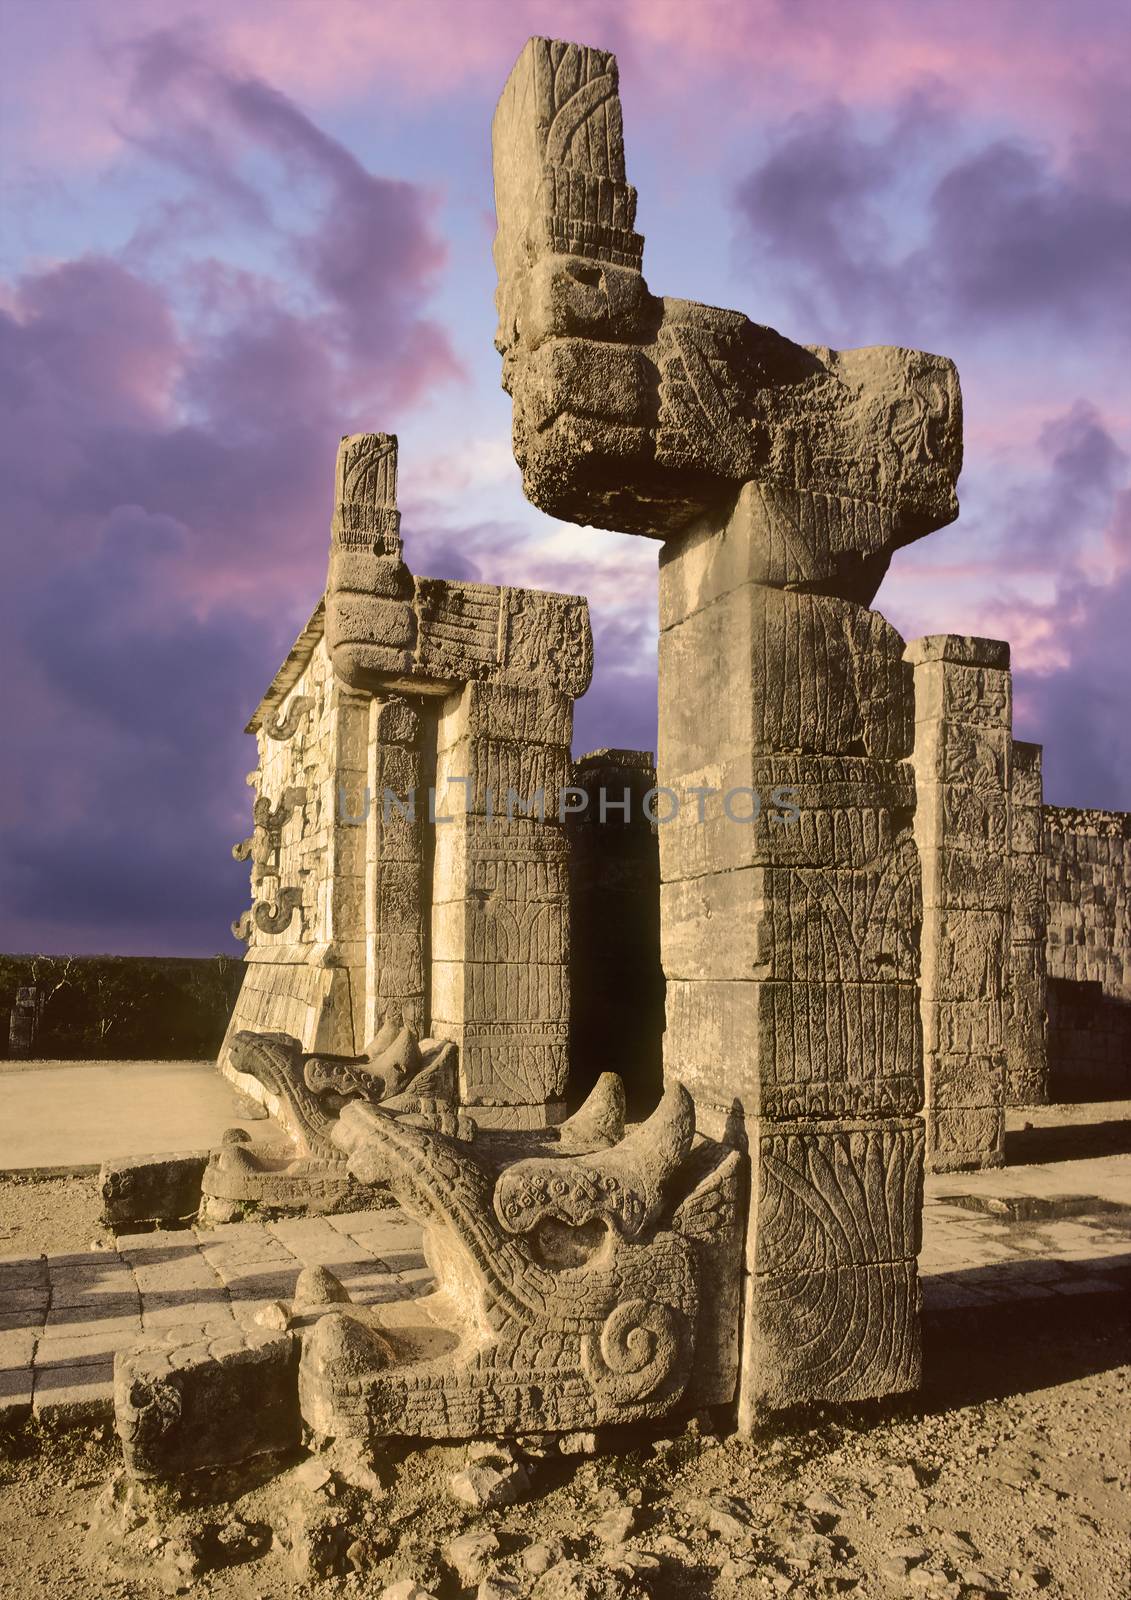 Mayan temple pyramid sculpture, Mexico by f/2sumicron